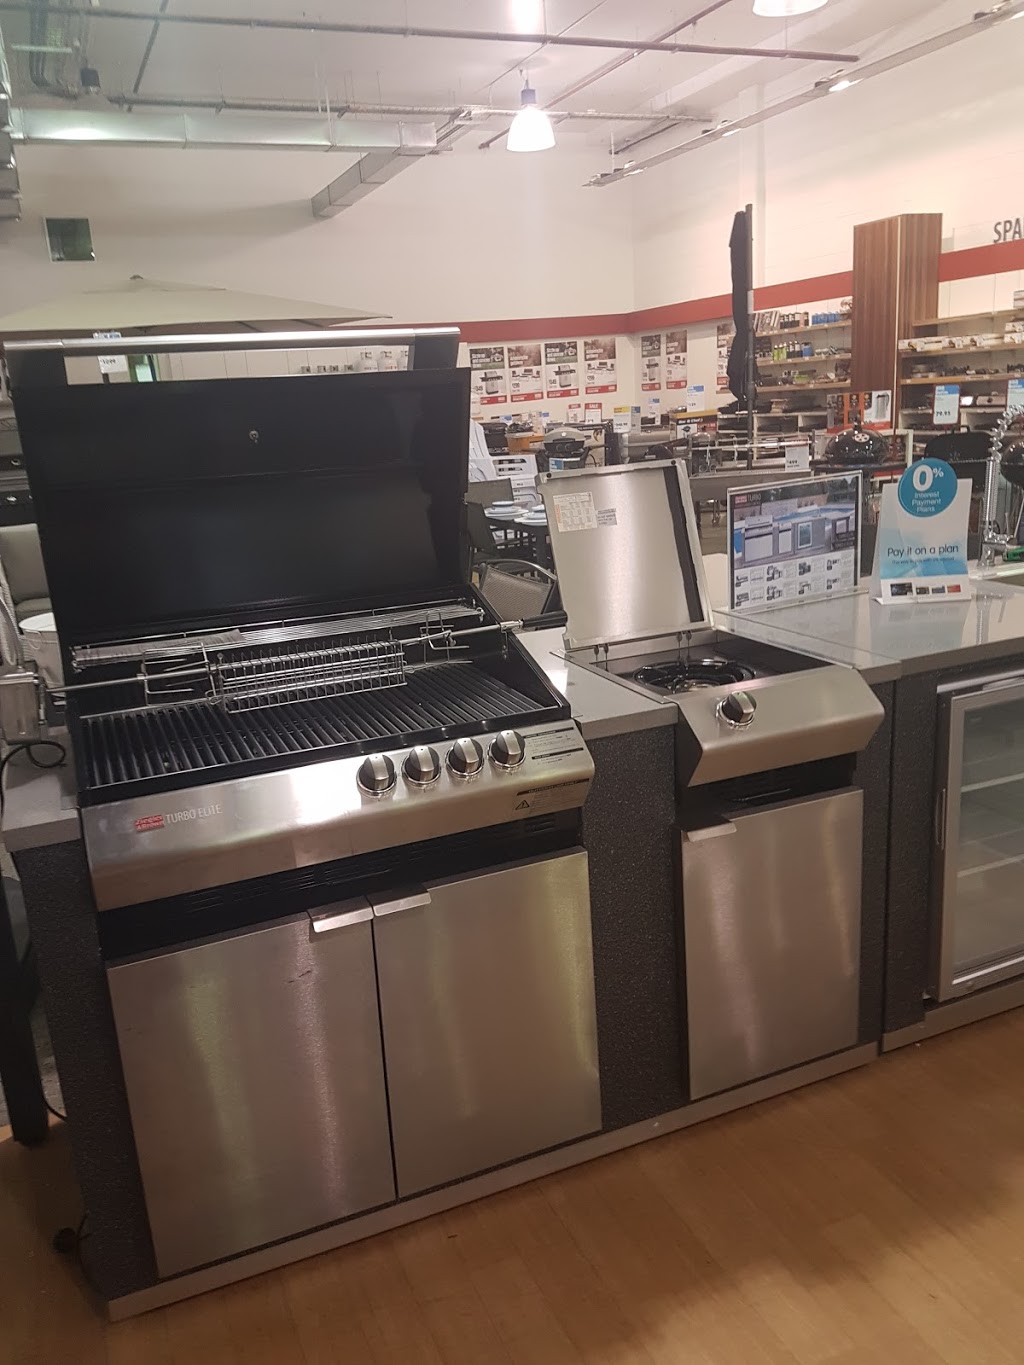 Barbeques Galore Castle Hill | furniture store | Home Hub Castle Hill, Ground Floor, Shop 23 Cnr Showground Road &, Victoria Ave, Castle Hill NSW 2154, Australia | 0296347000 OR +61 2 9634 7000